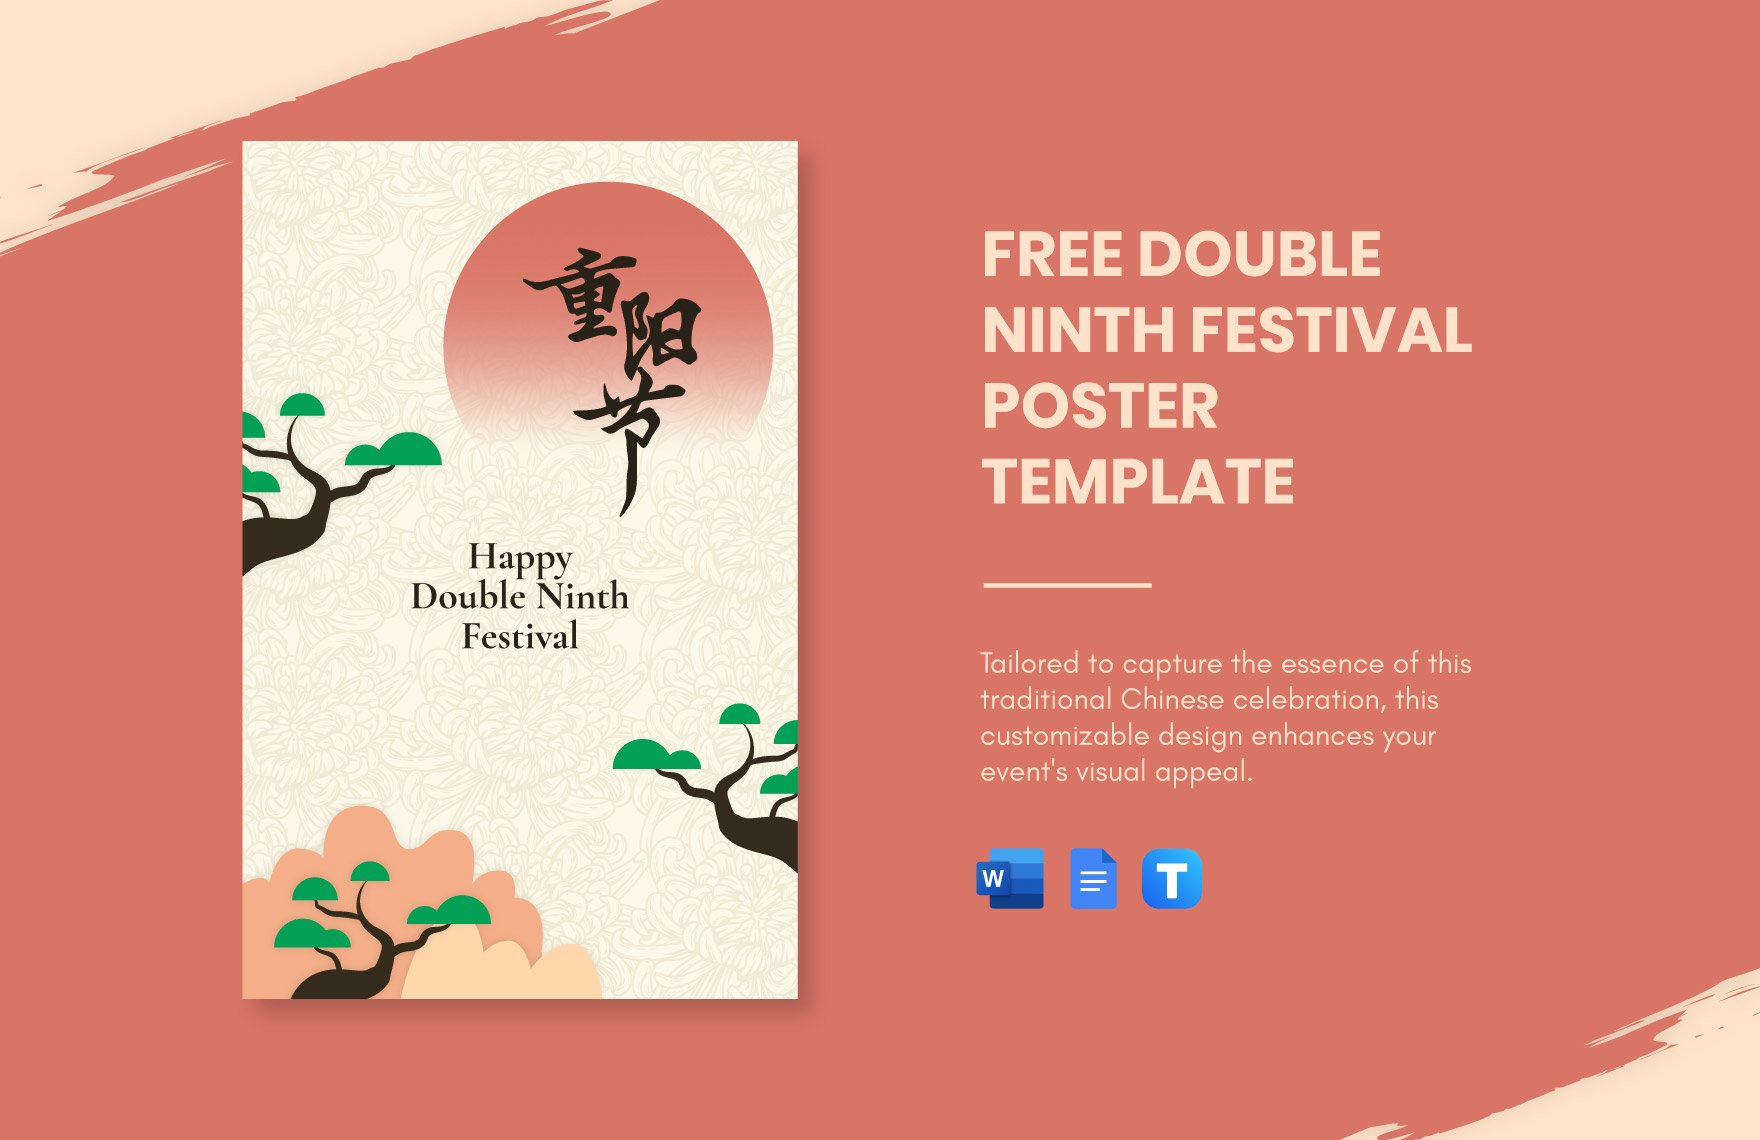 Double Ninth Festival Poster Template in Word, Google Docs